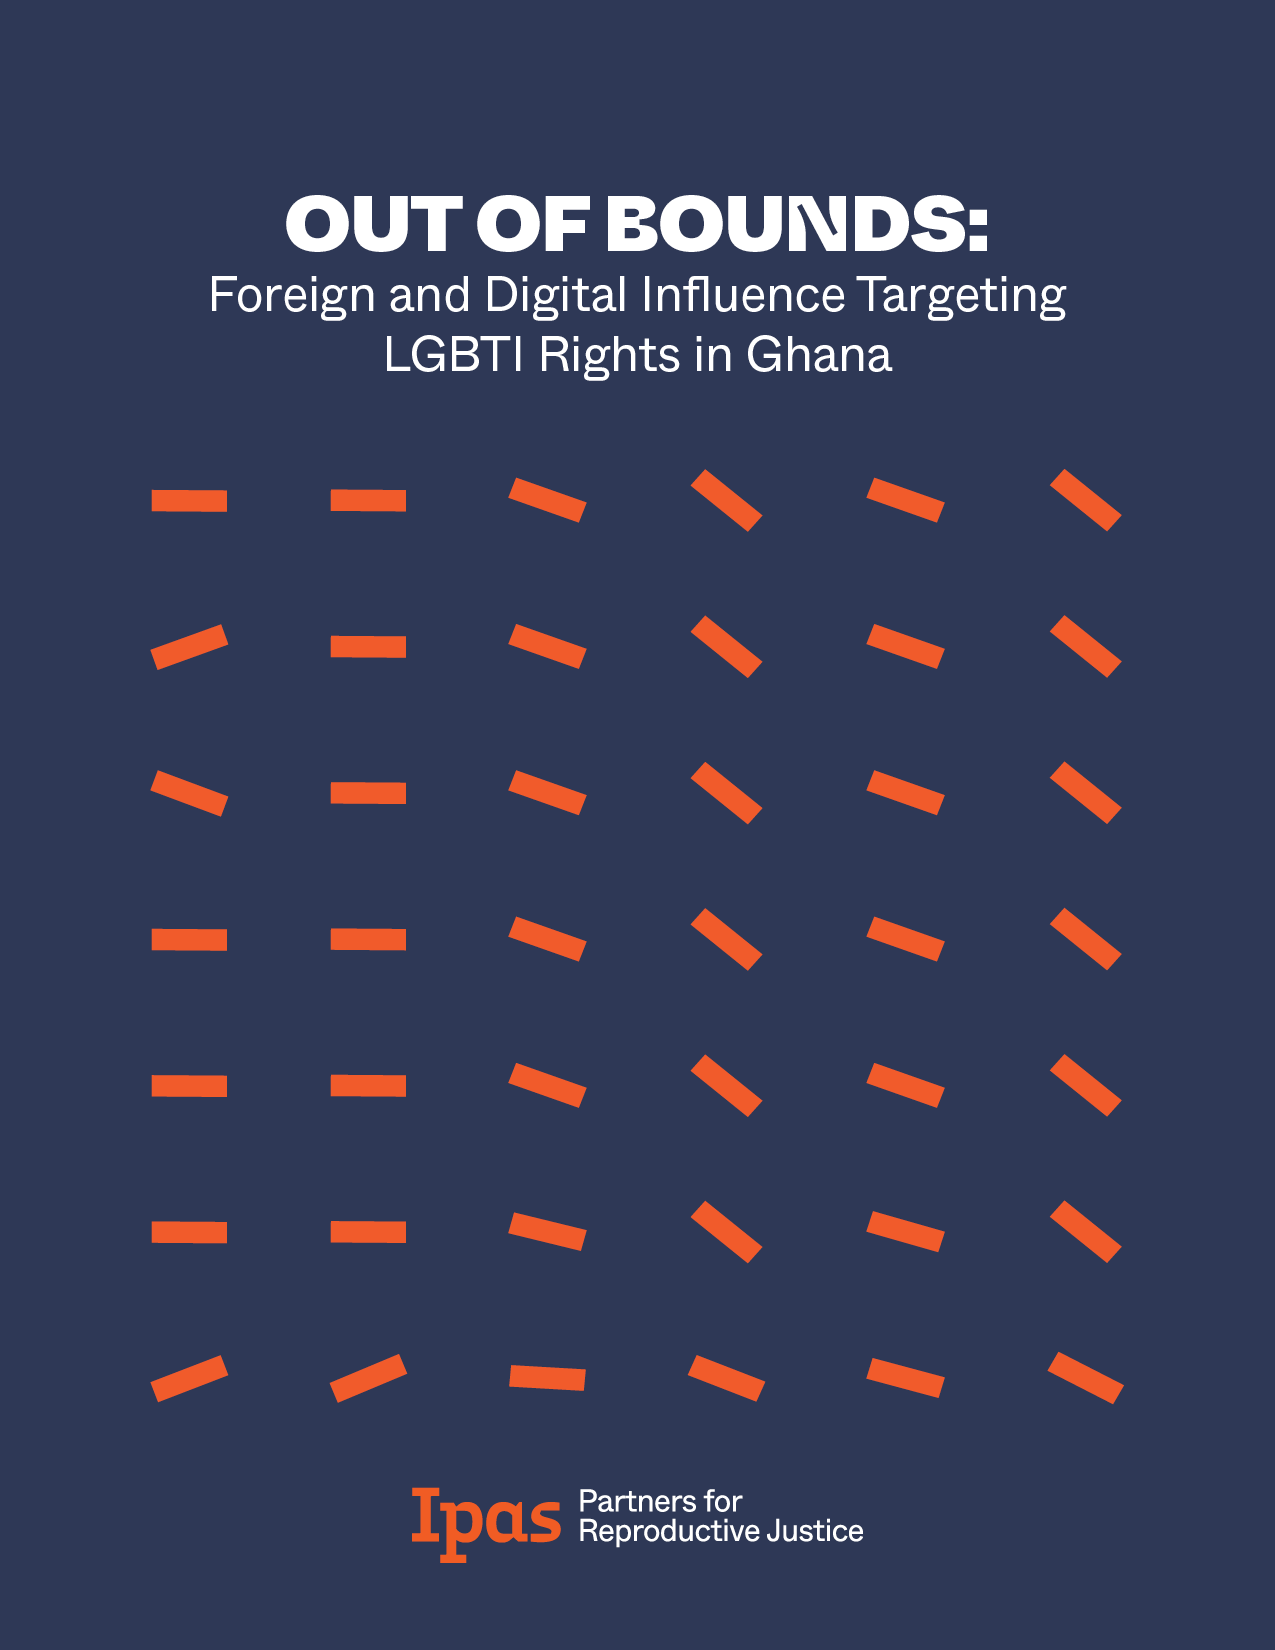 Out of Bounds-Foreign and Digital Influence Targeting LGBTI Rights in Ghana